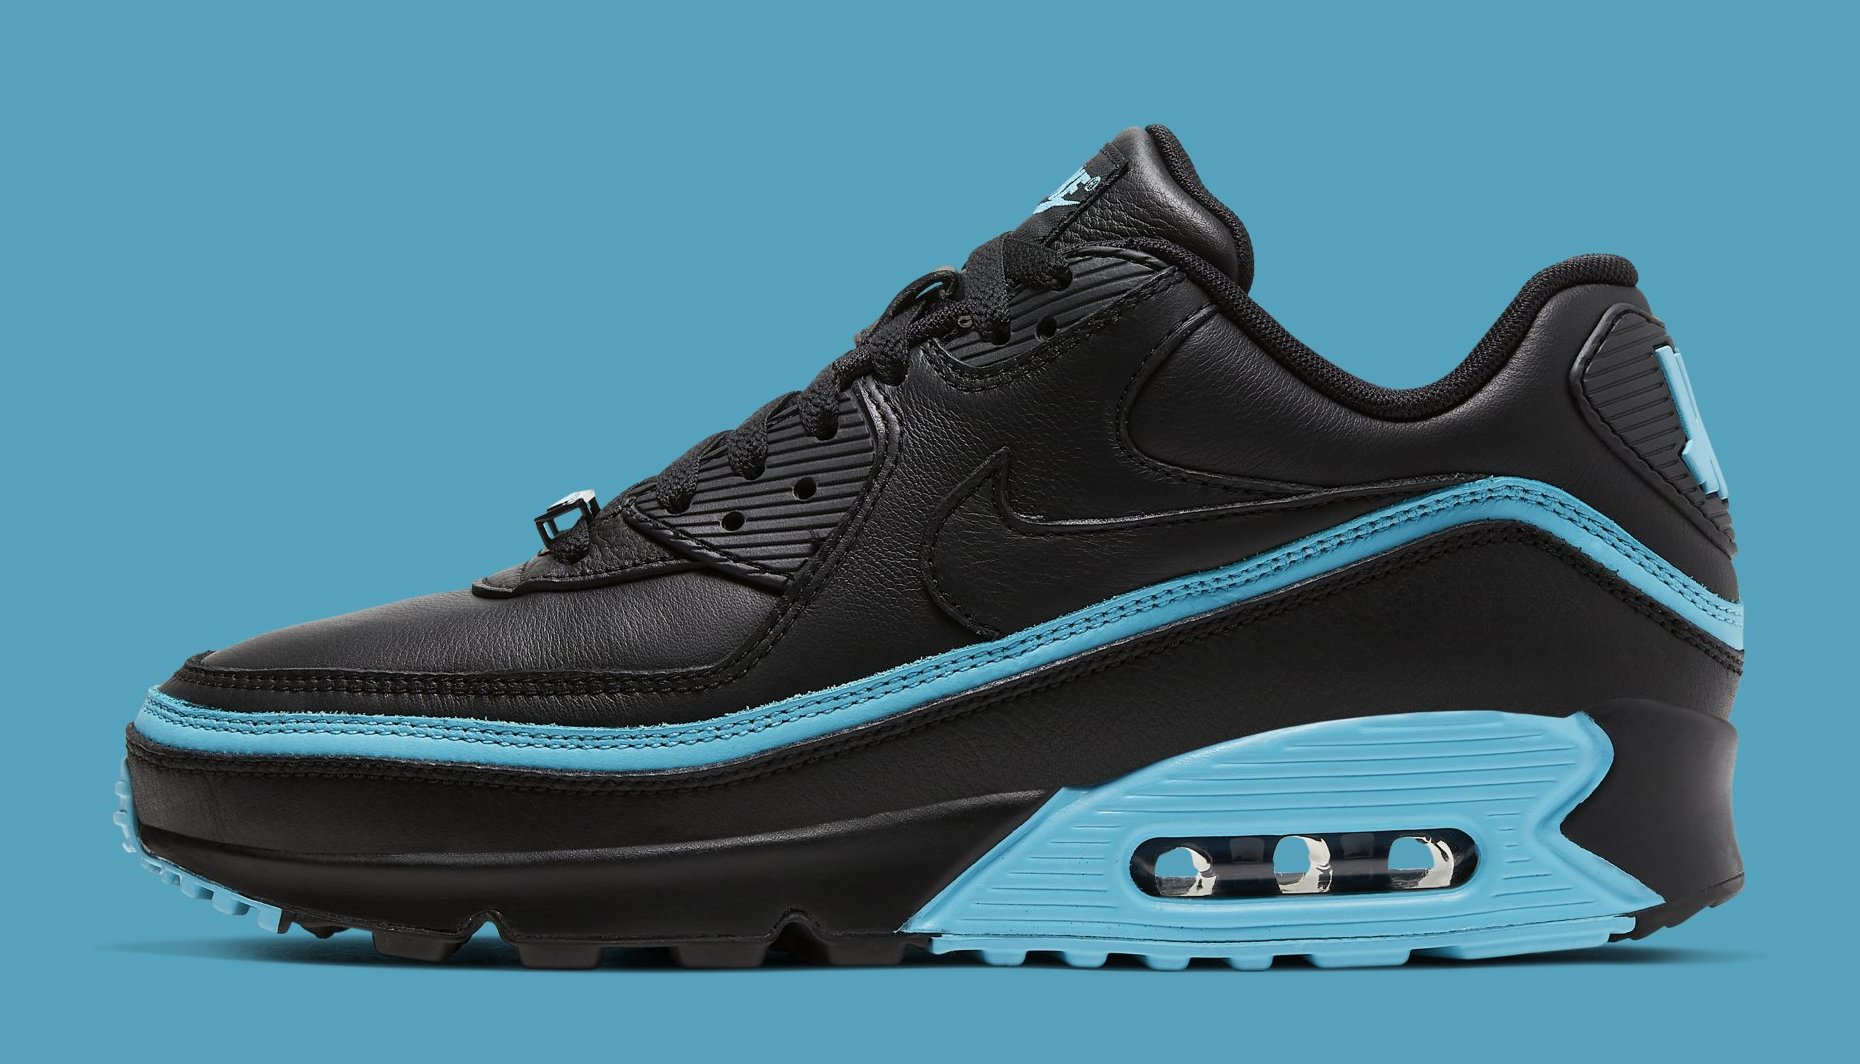 undefeated nike air max 90 black blue fury cj7197 002 lateral